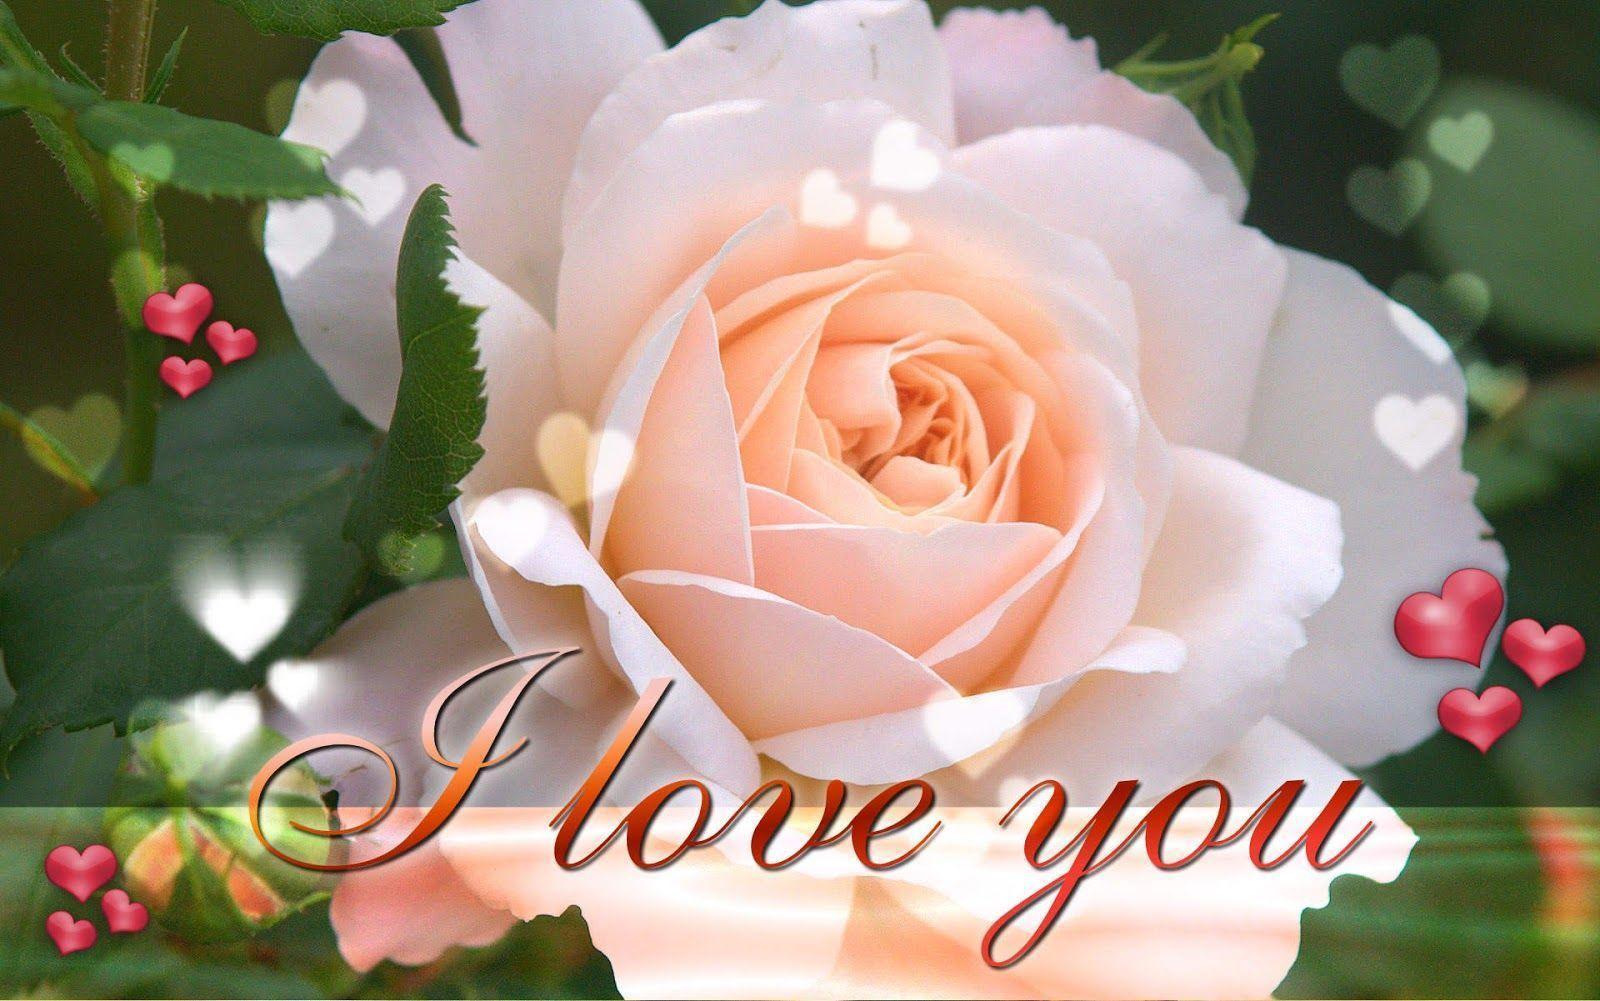 New Latest i love you wallpaper on this valentines day 2015